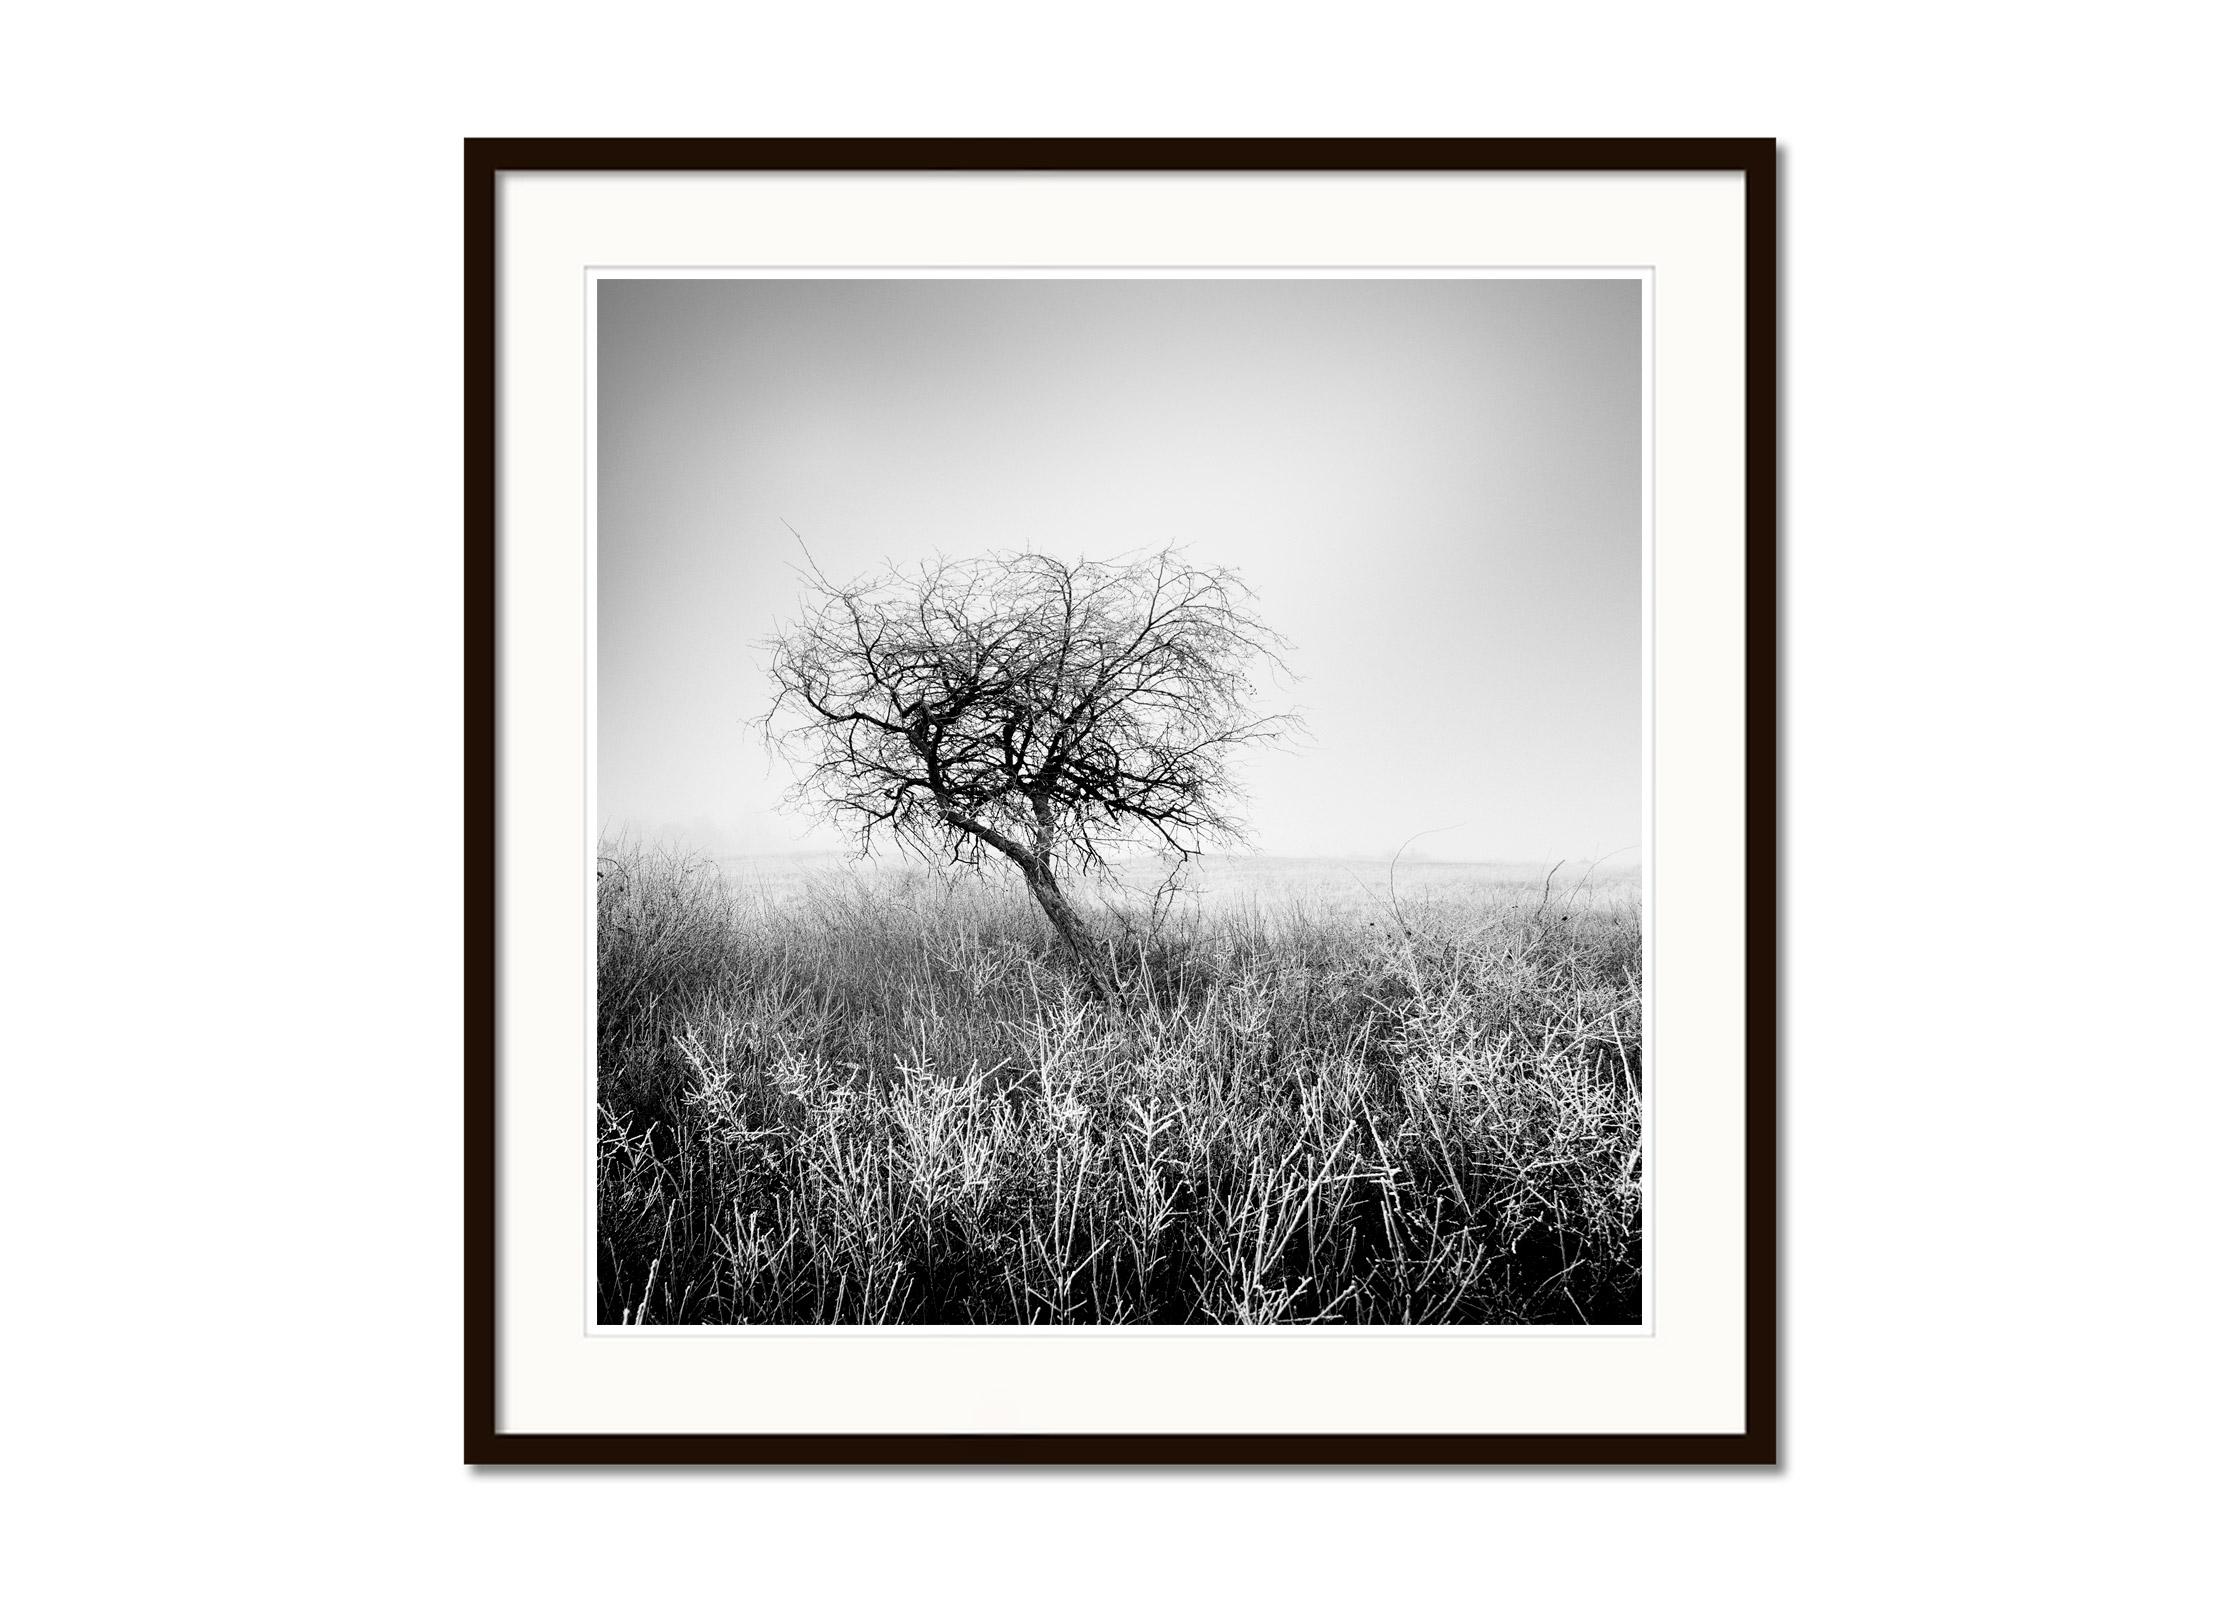 Tree in hoarfrost, frozen, Hungary, black and white art landscape photography  - Contemporary Photograph by Gerald Berghammer